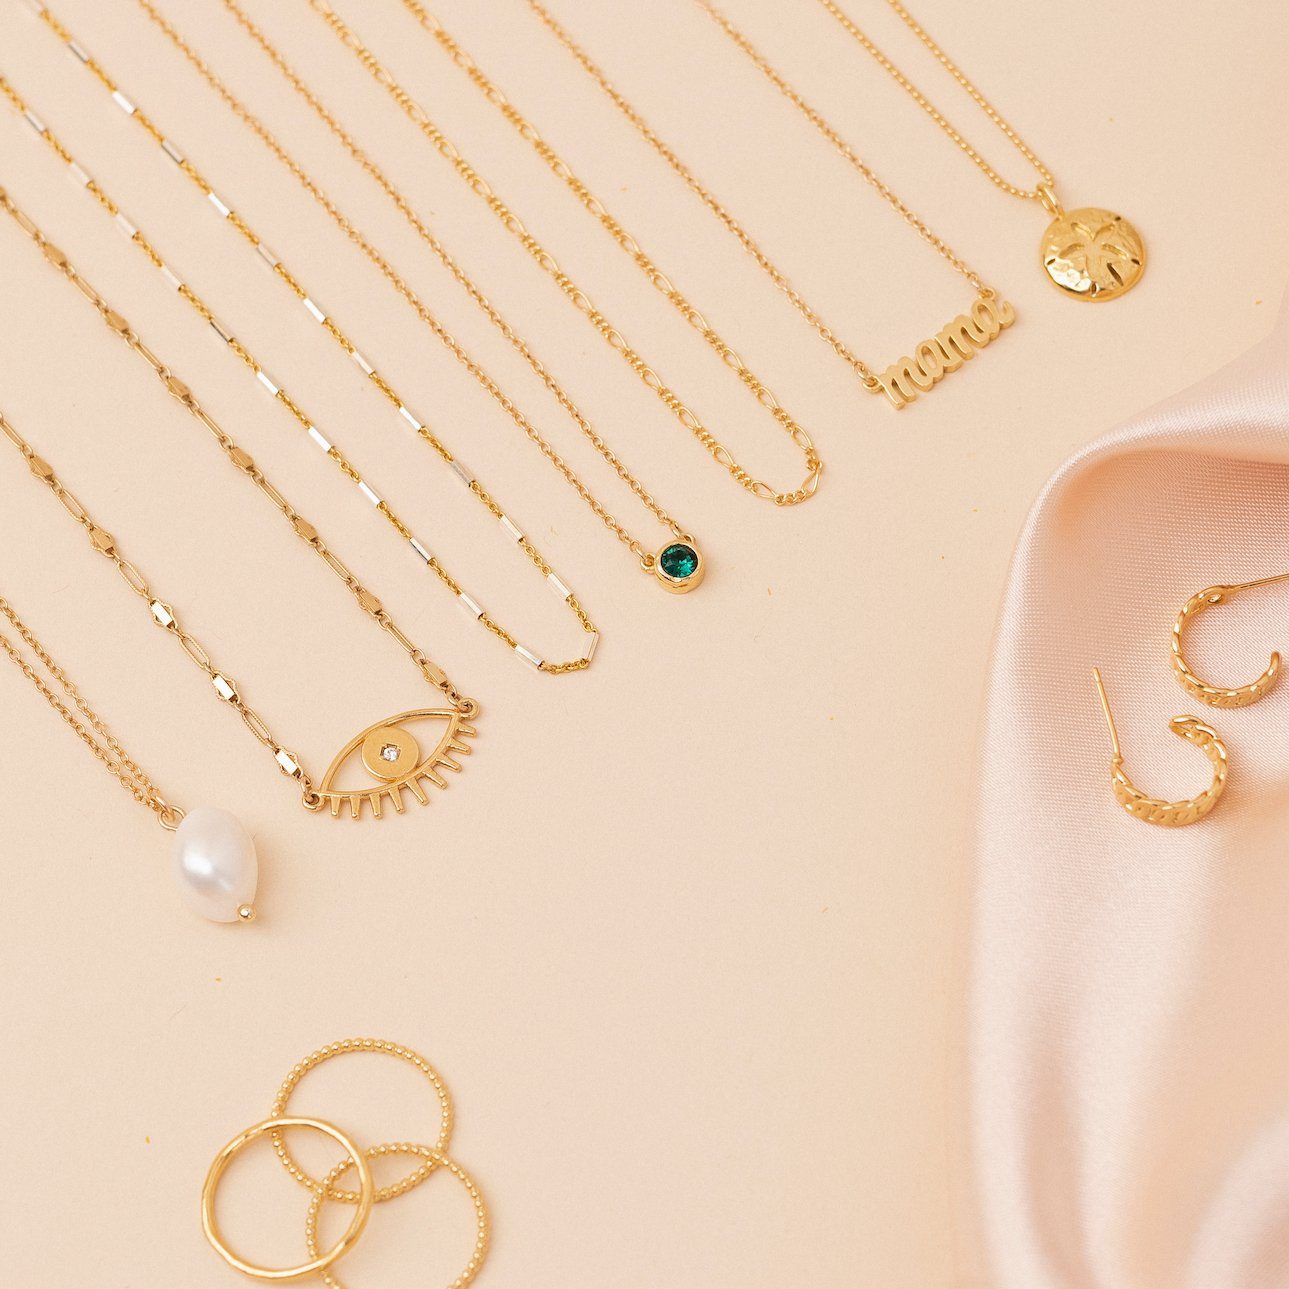 Dainty gold layering necklaces handmade in America by Katie Dean Jewelry